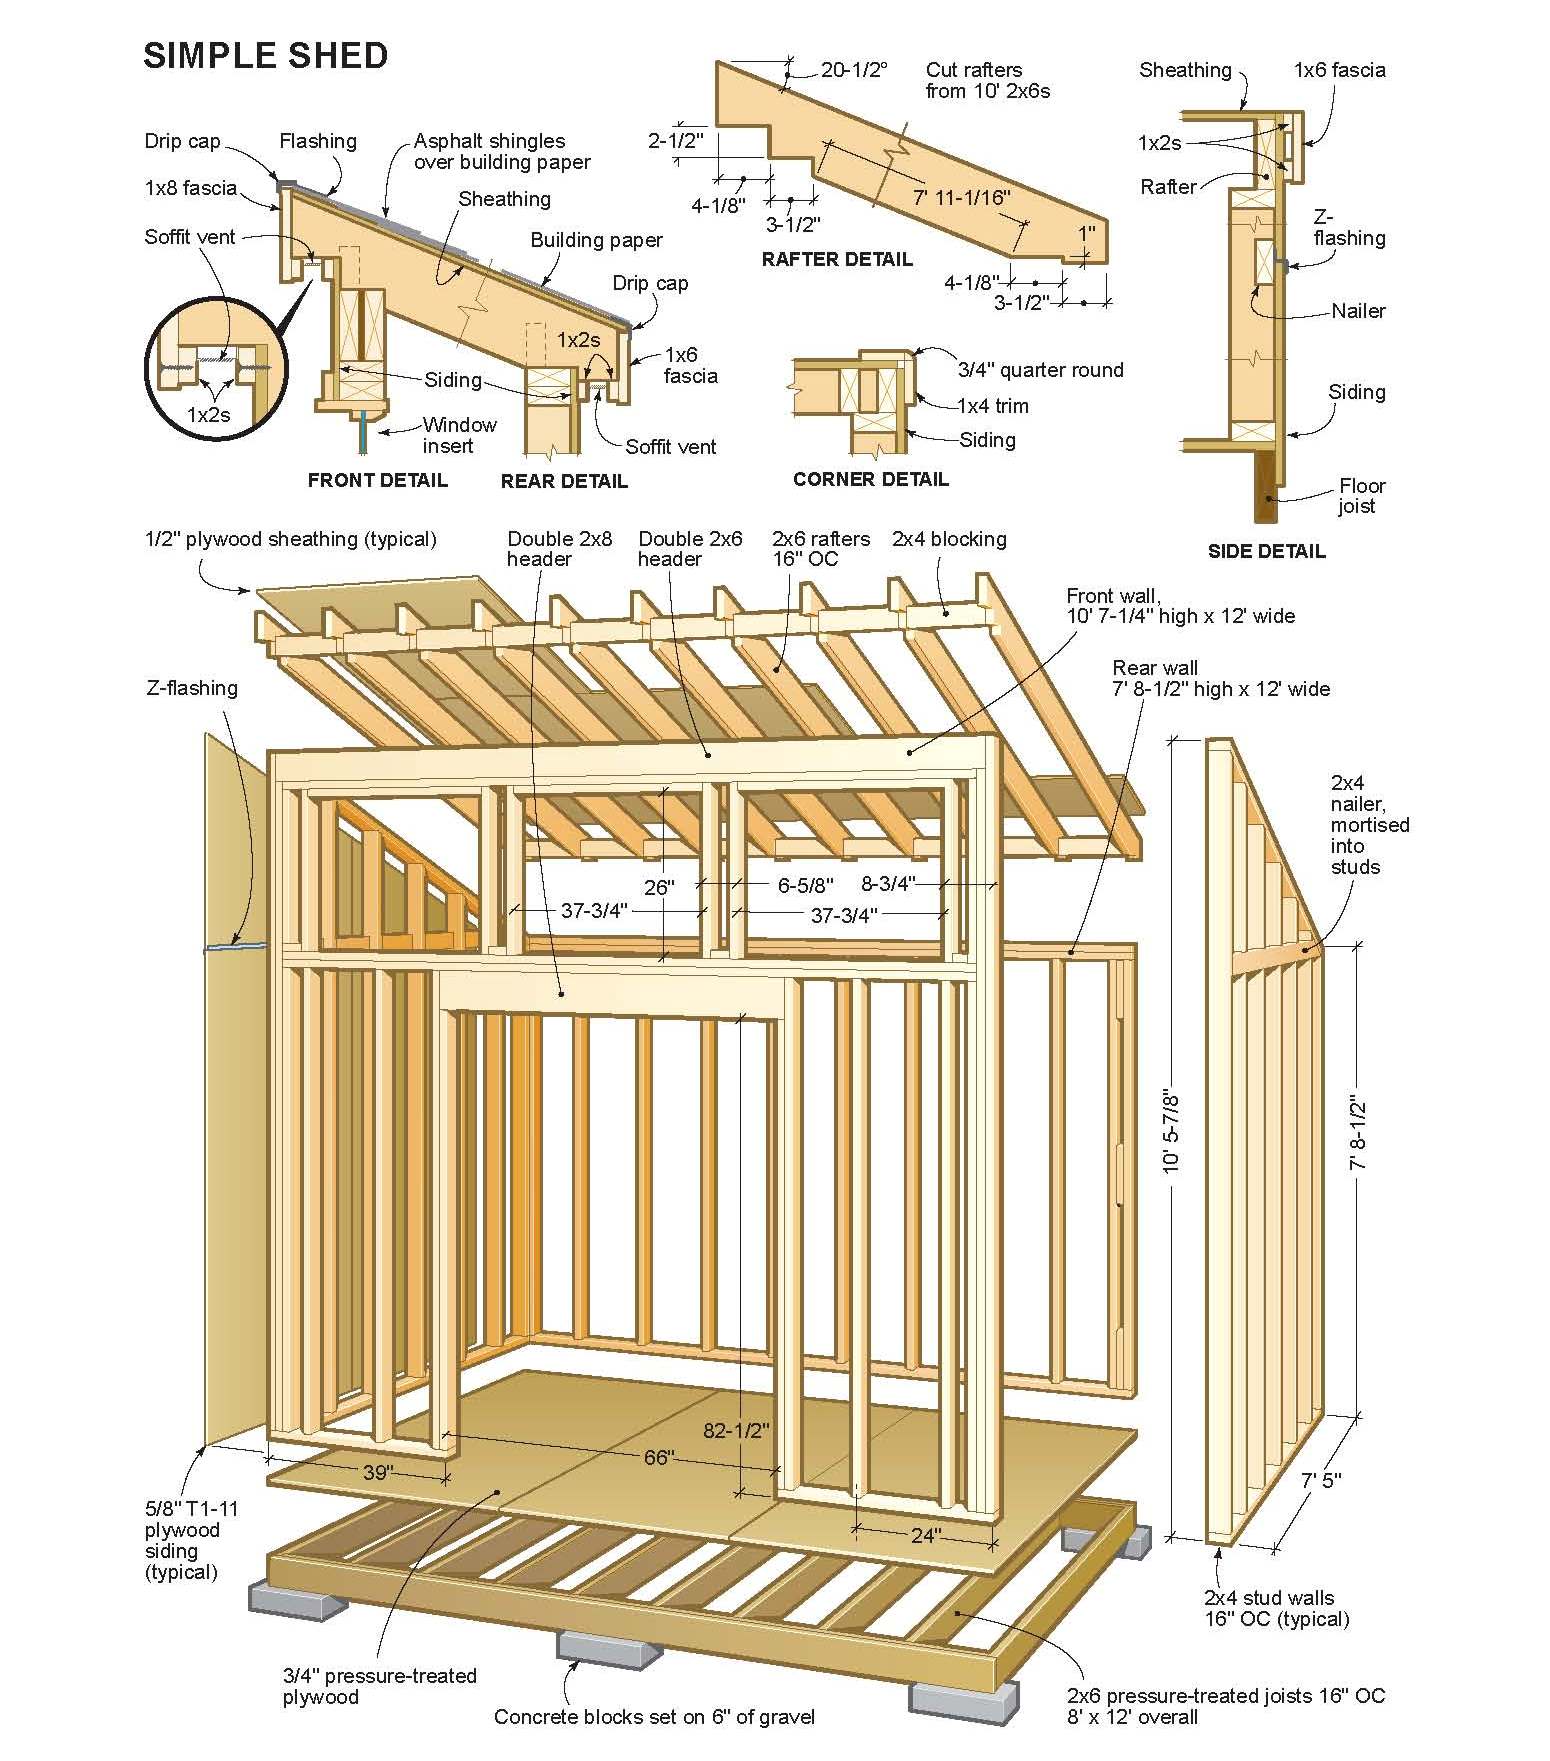 ... fire brick wood building plans for backyard dome oven from free plans